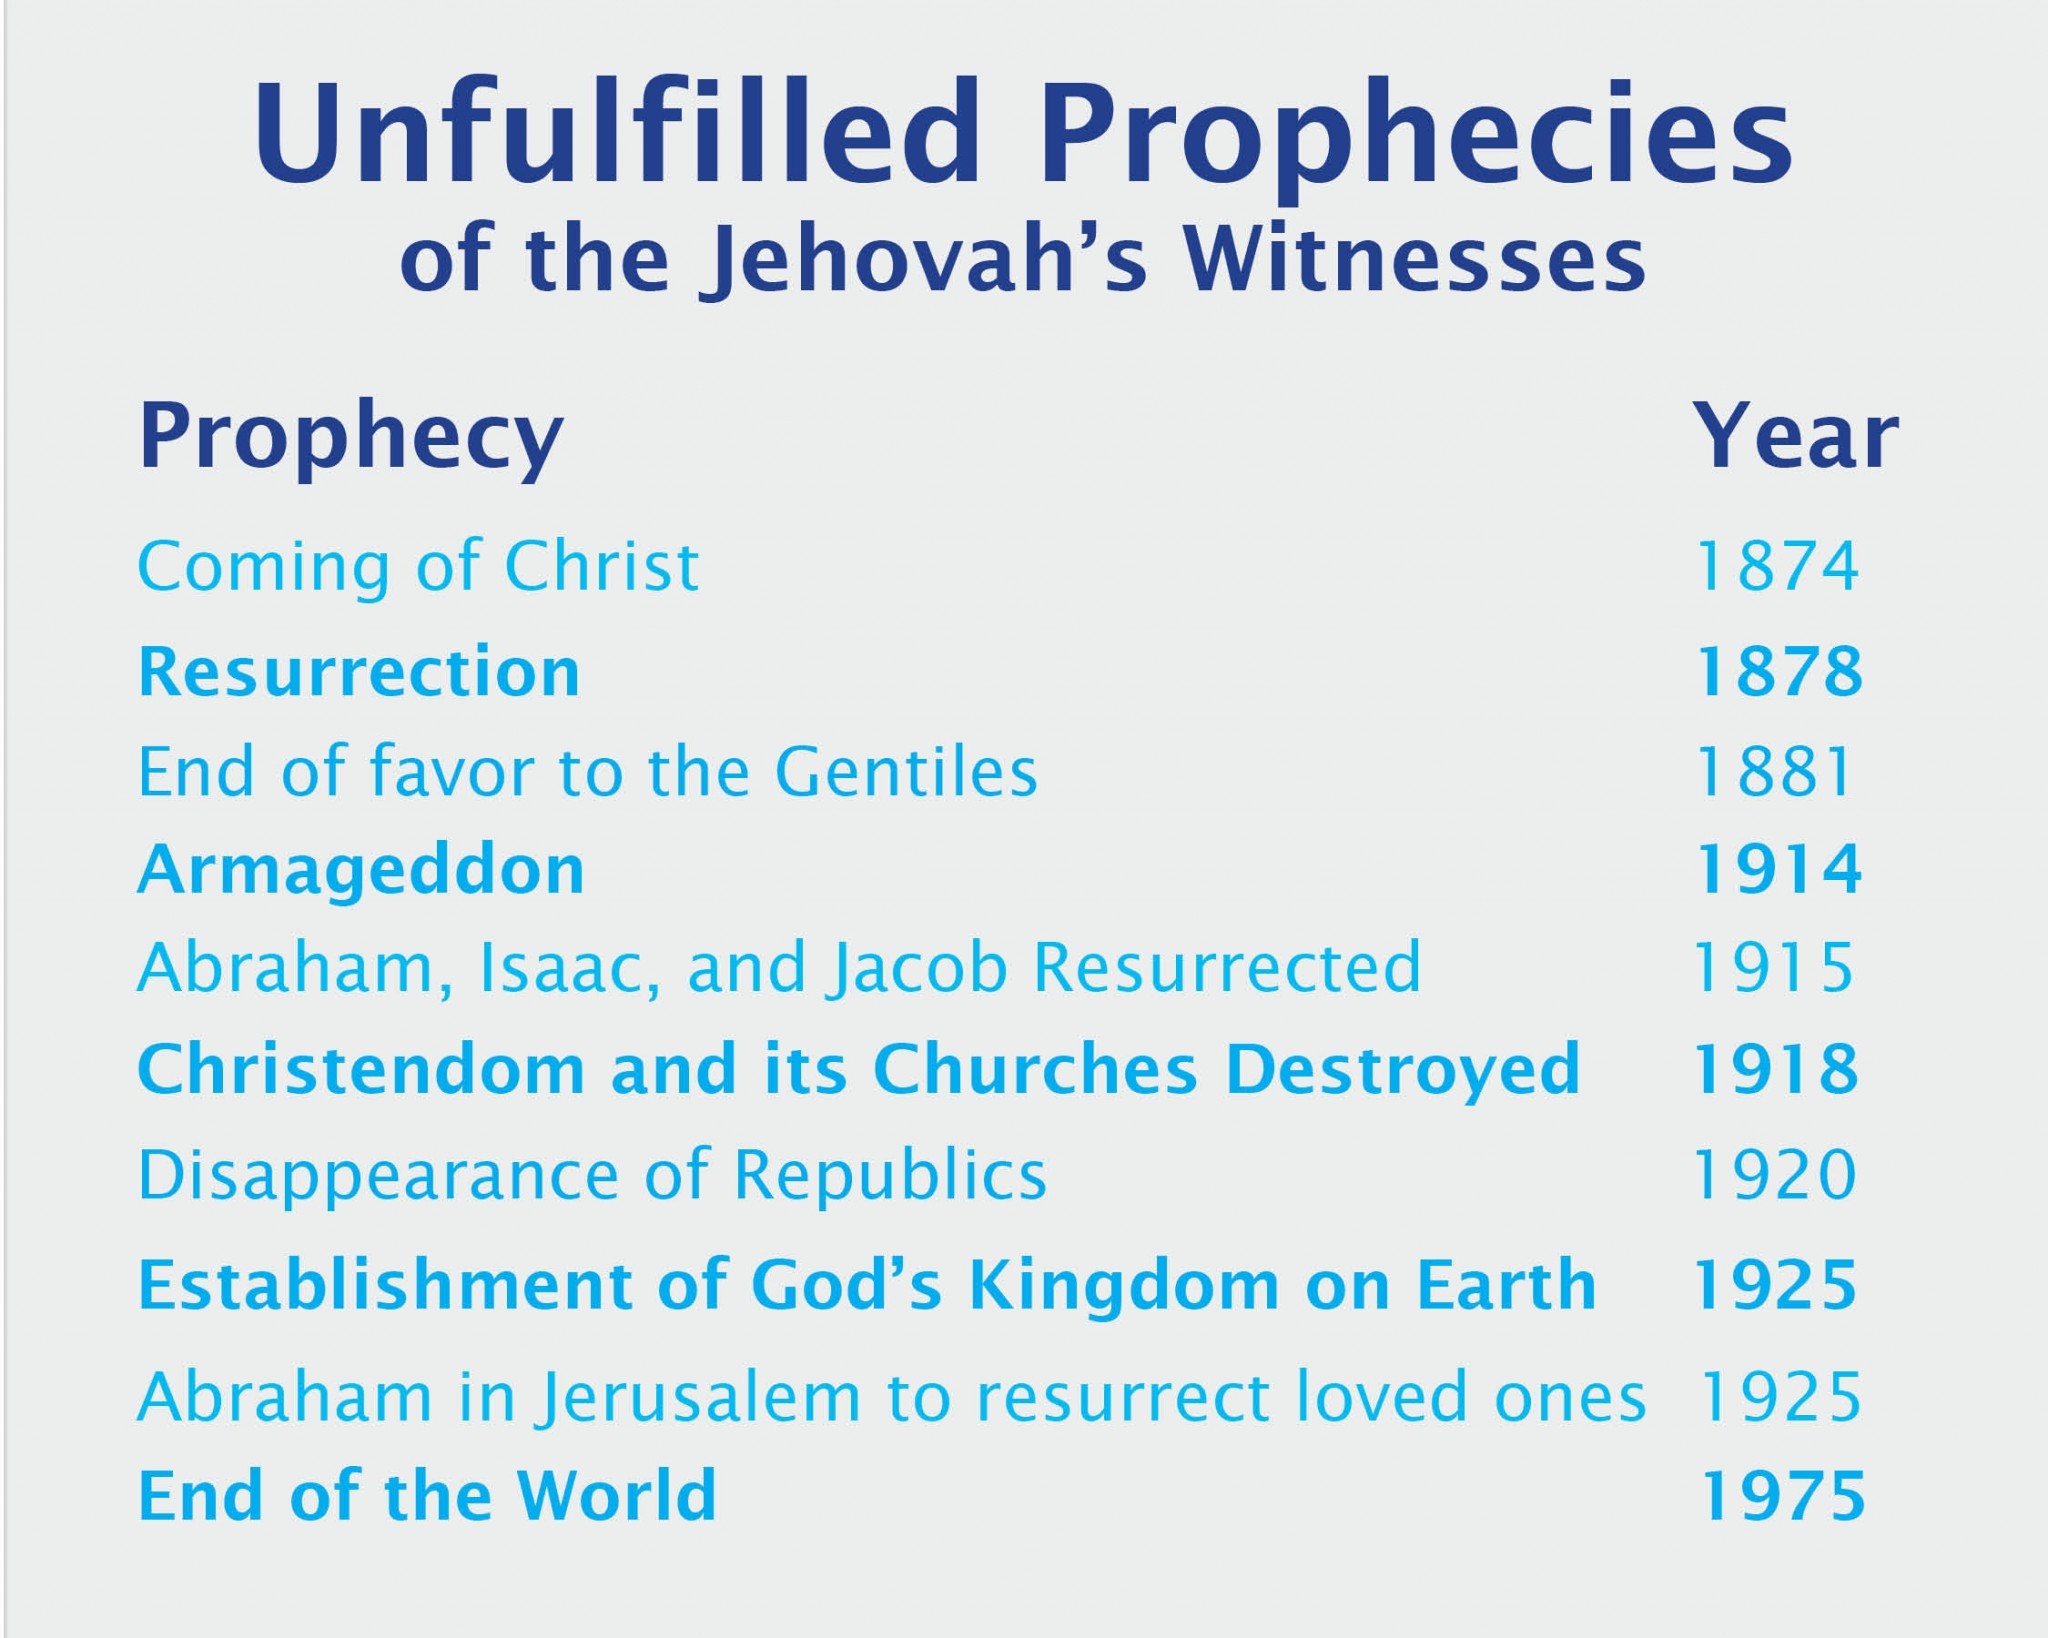 Prophecies from Jehovahs Witness doctrine, with the year they were to be fulfilled. Clearly